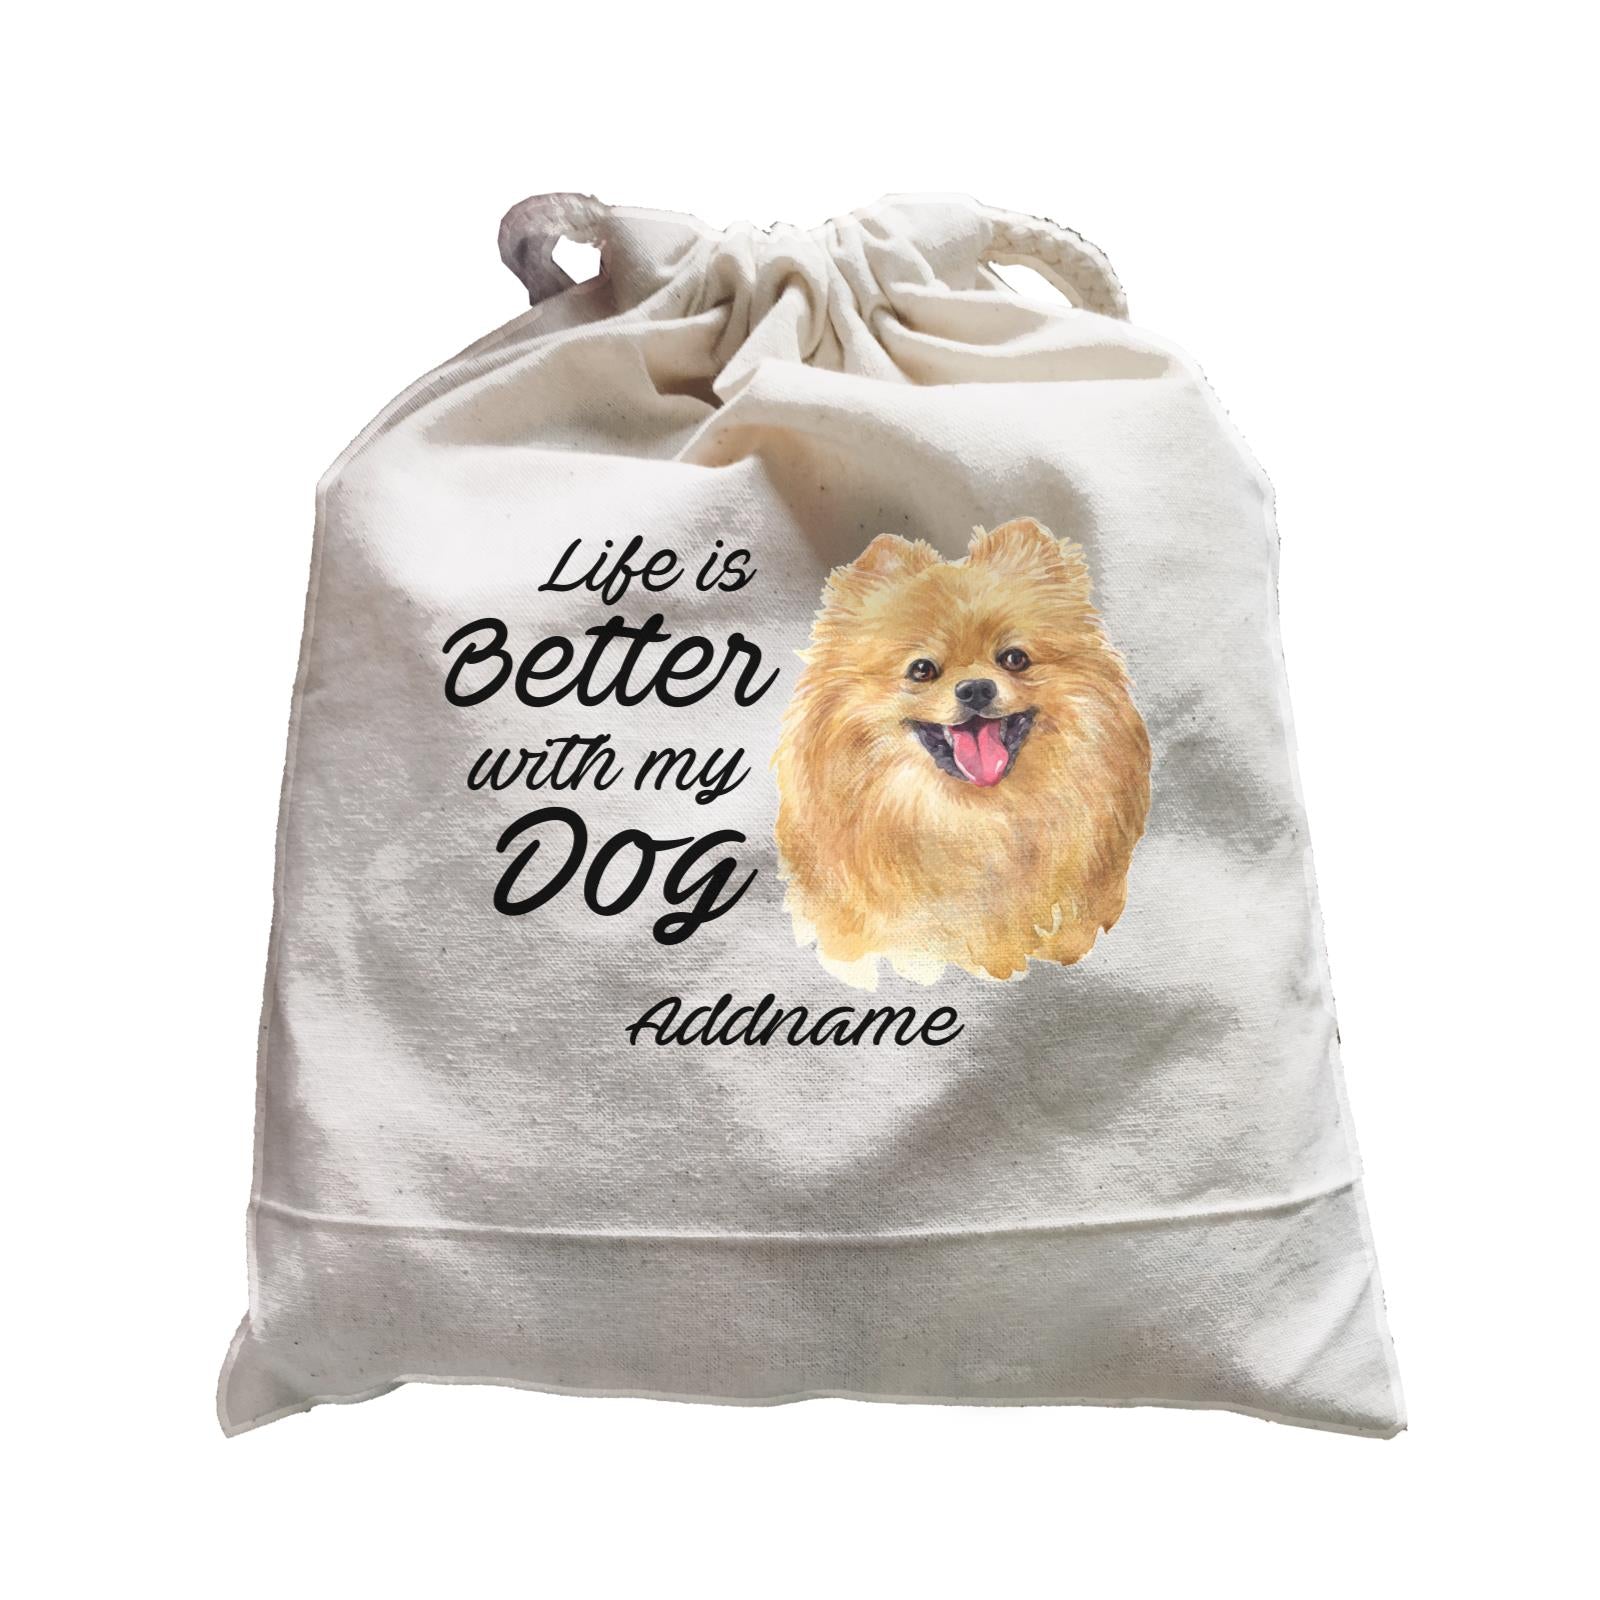 Watercolor Life is Better With My Dog Pomeranian Addname Satchel